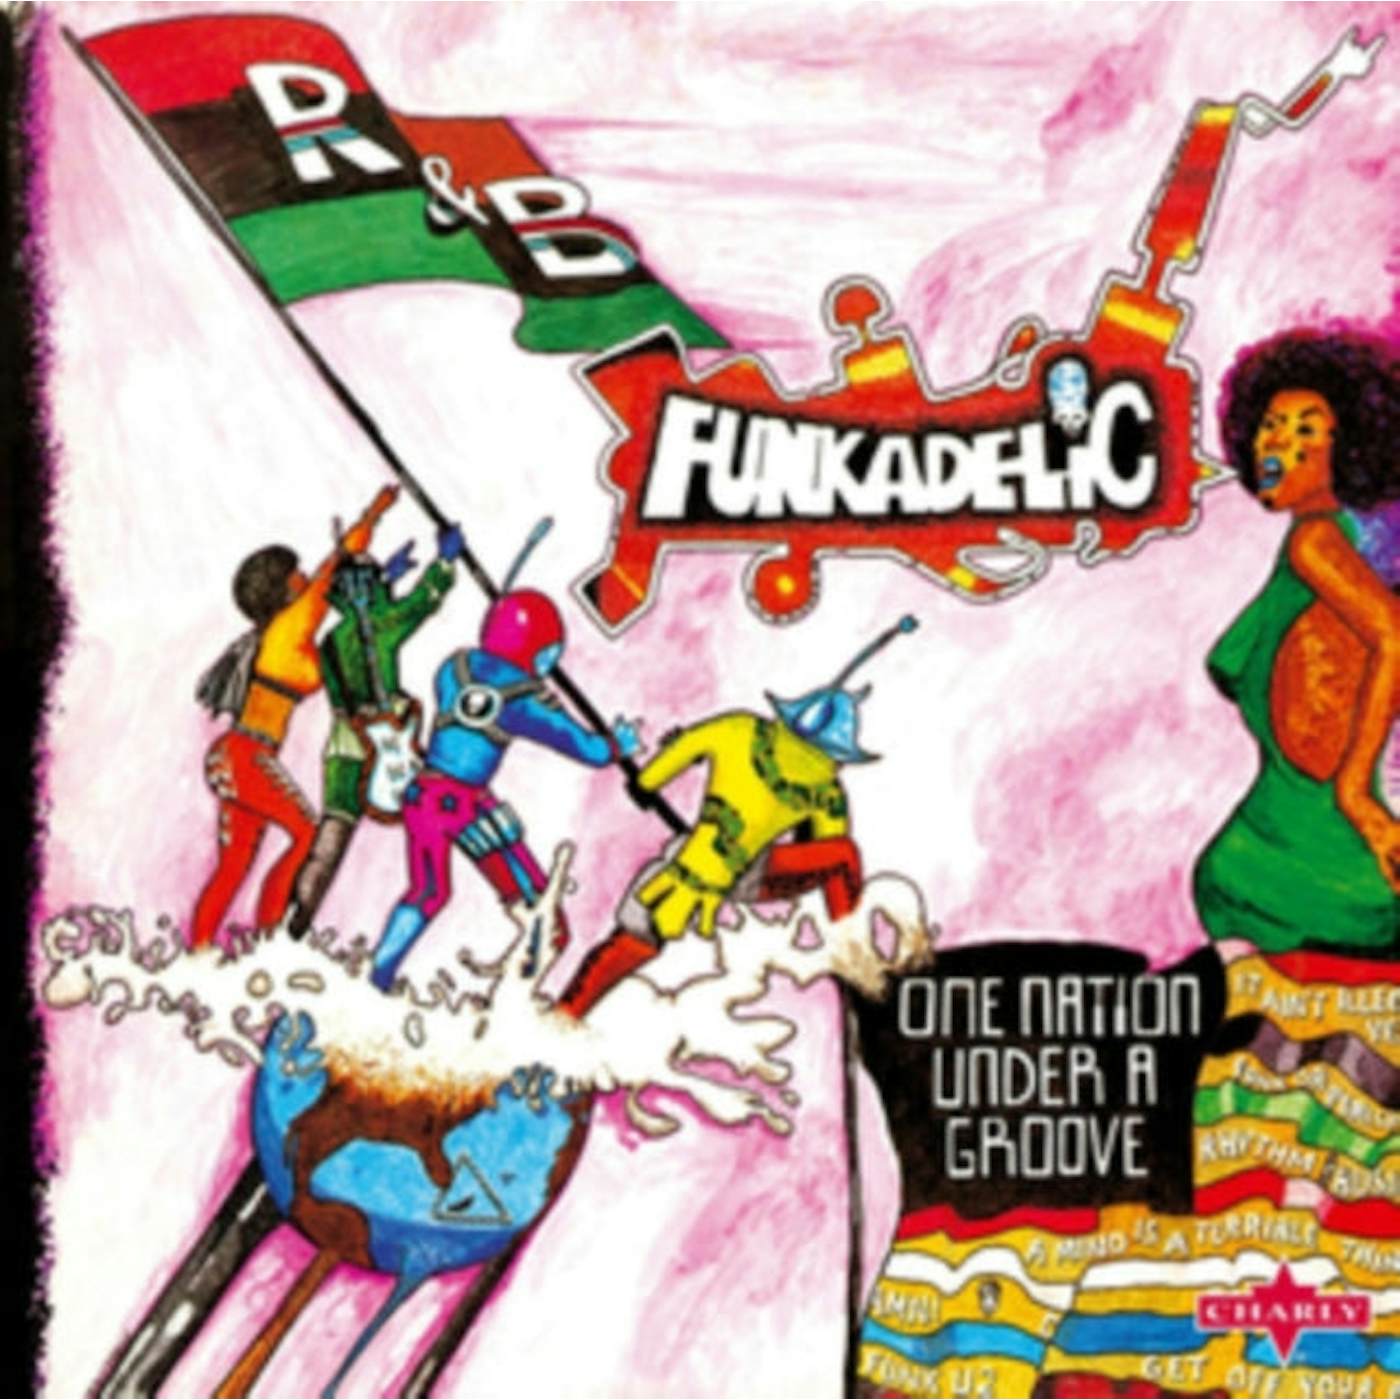 Funkadelic LP - One Nation Under A Groove (Red/Green Vinyl)